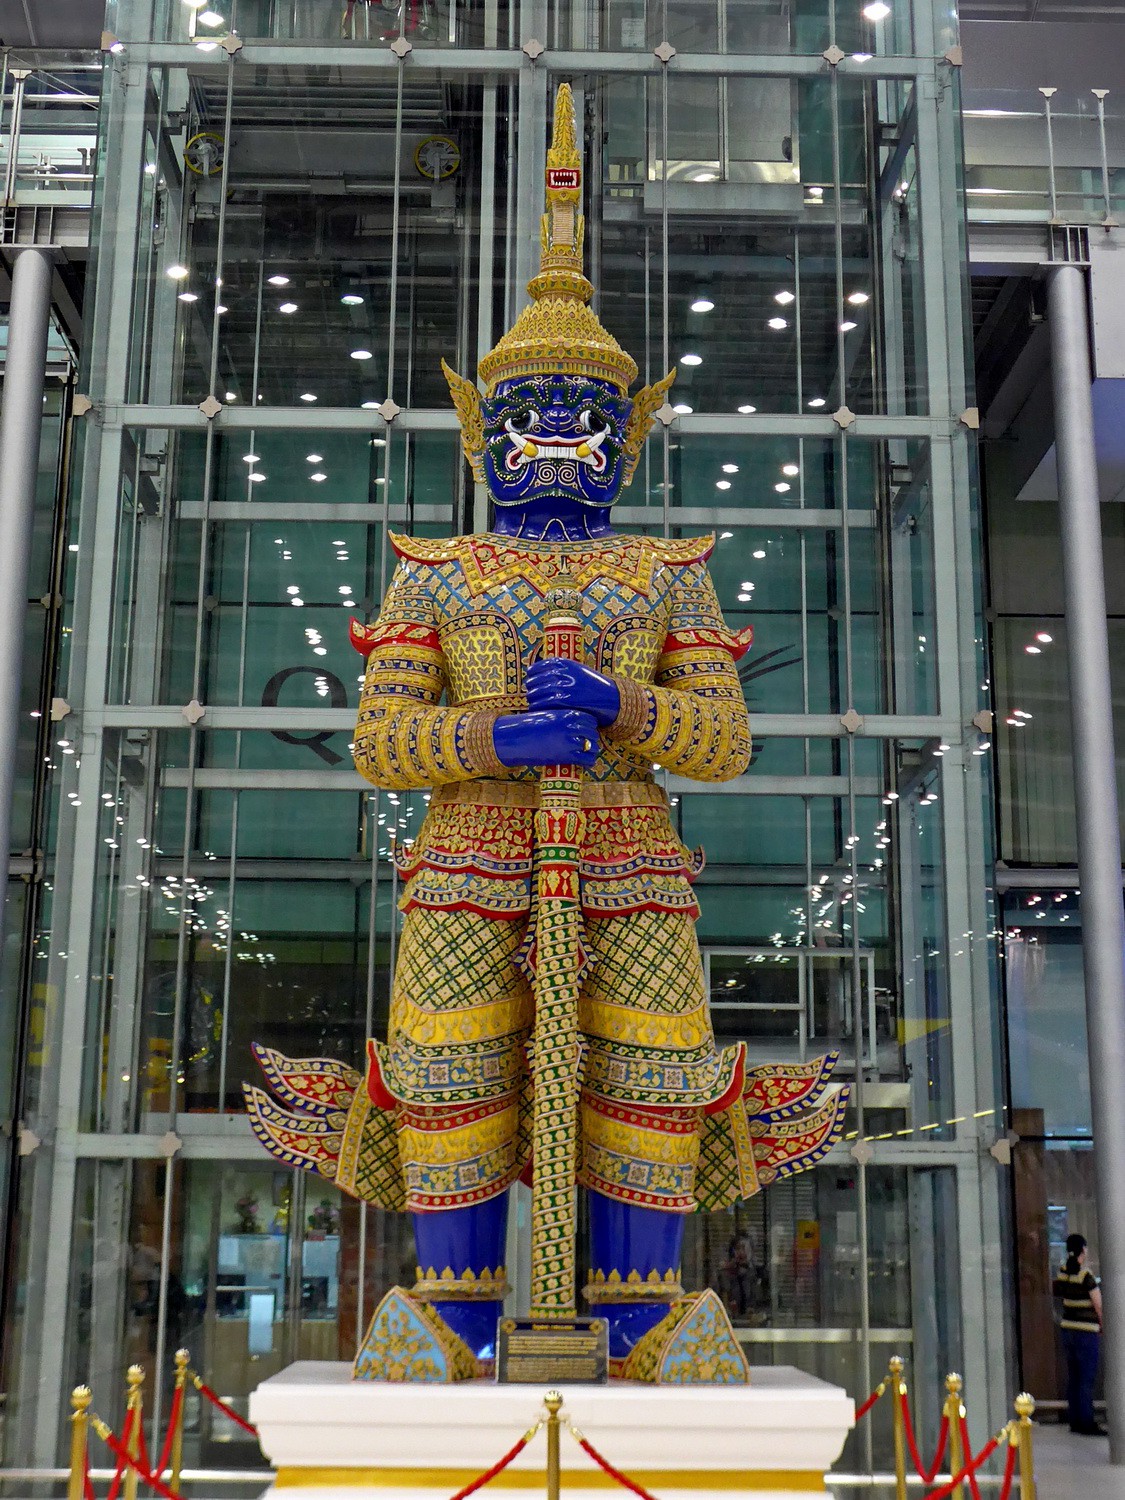 Virulhok on the airport. He is a giant with a dark blue body and was the ruler of the subterranean world in the Thai mythology